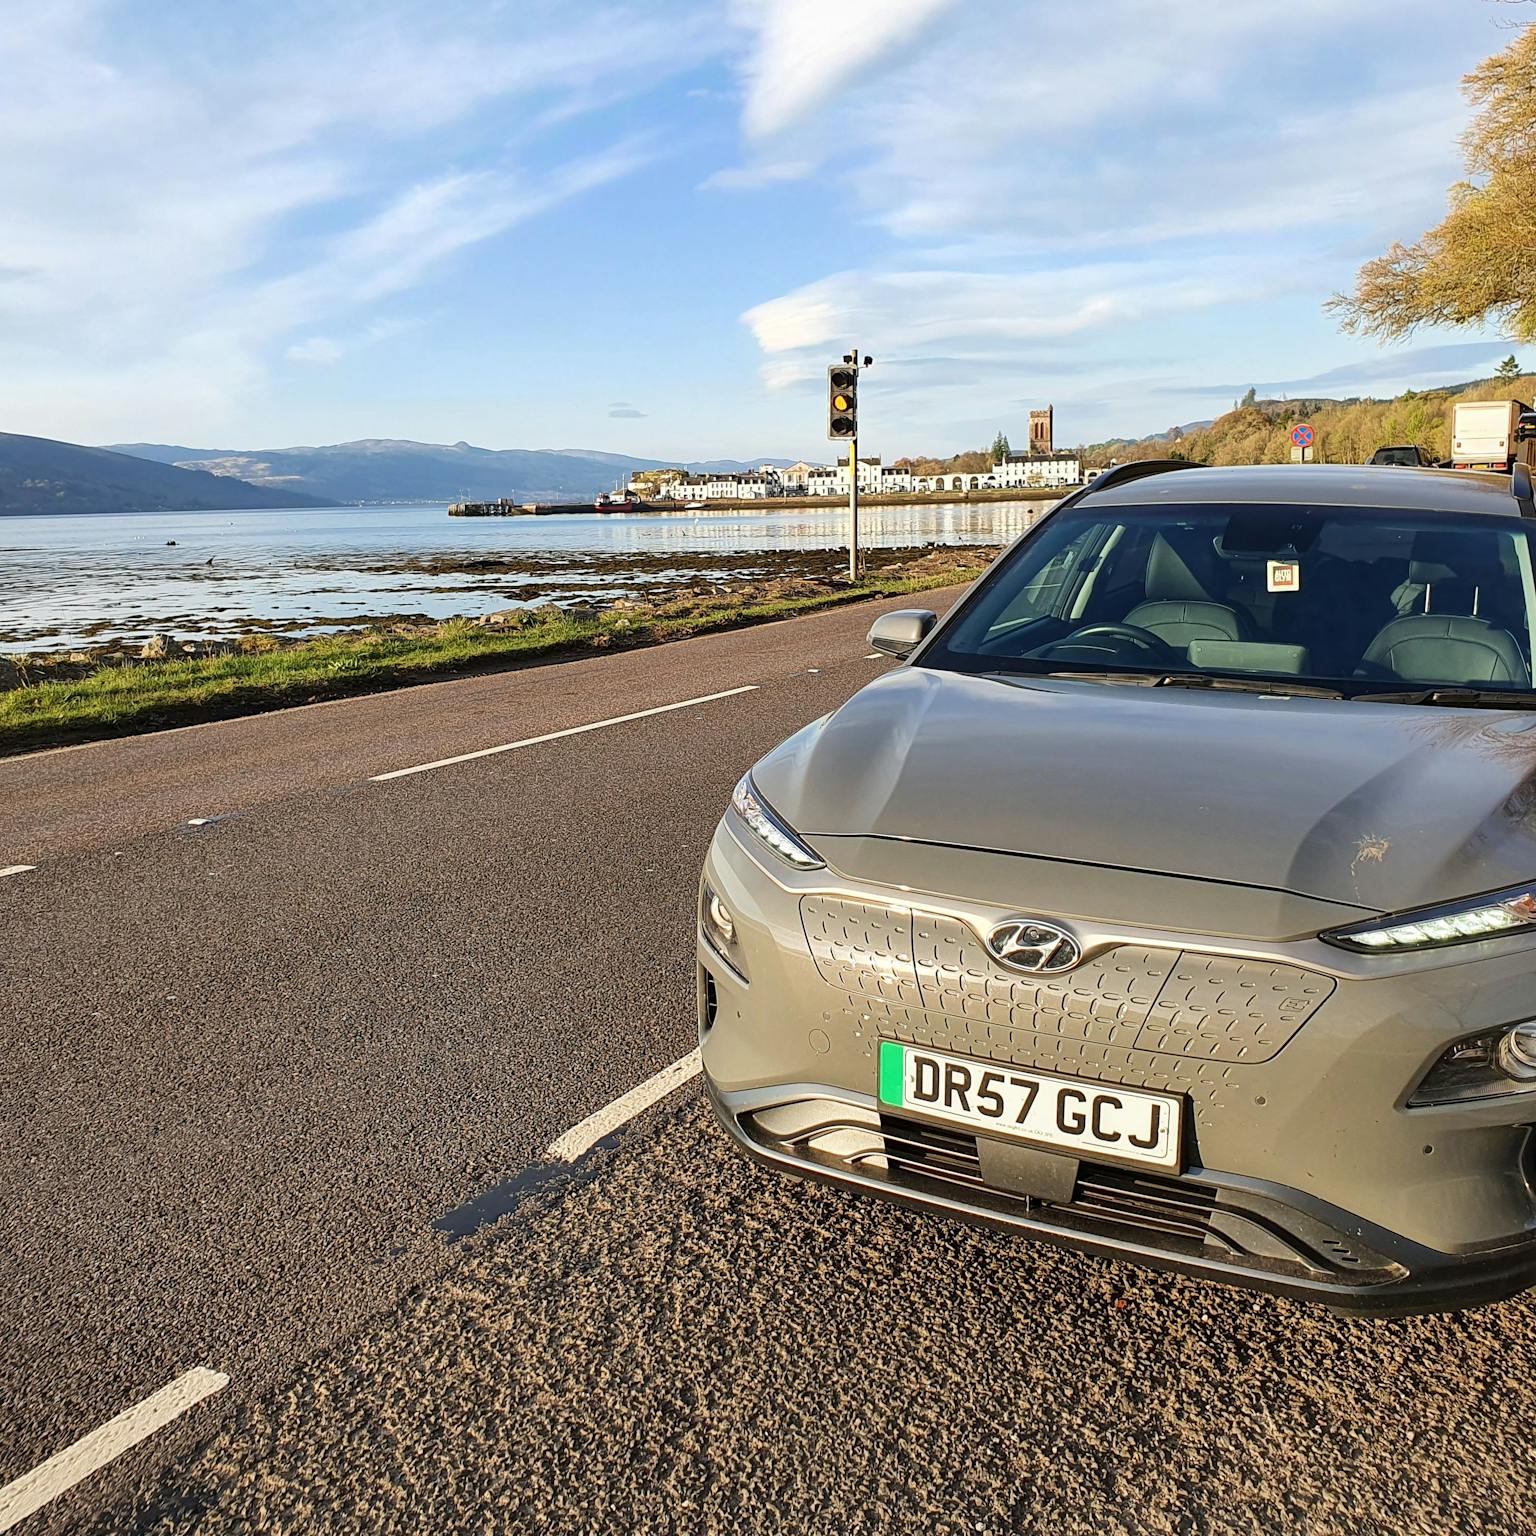 image shows electric car hyundai next to a lake with hills in the background